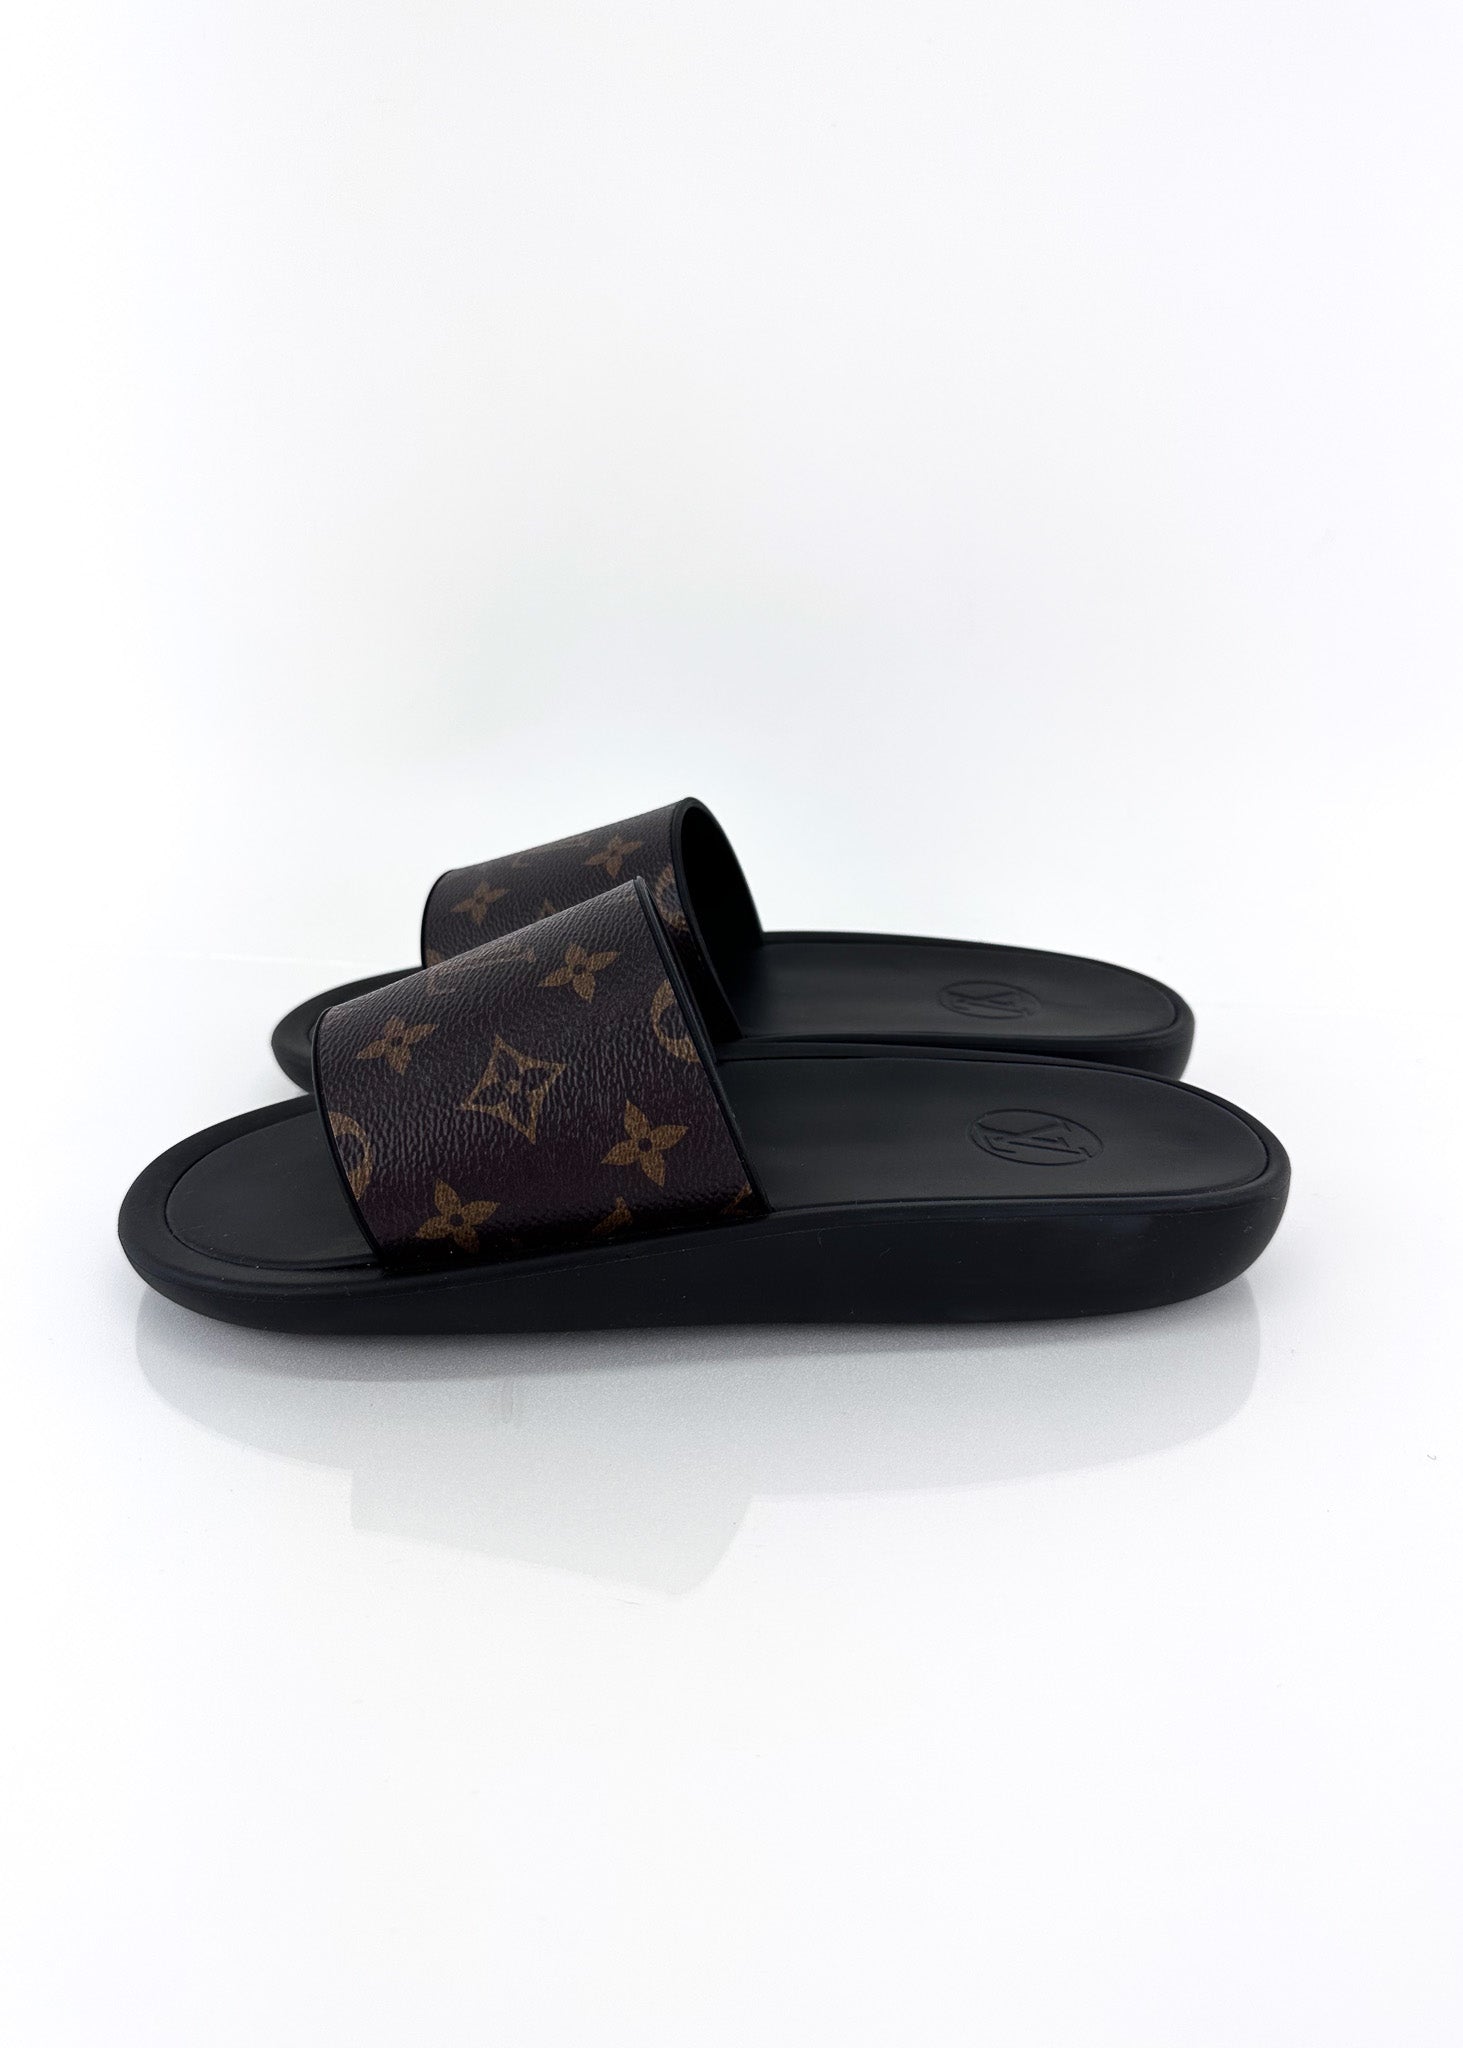 Louis Vuitton Monogram Eclipse Slides. Size 39. Made in Italy. No